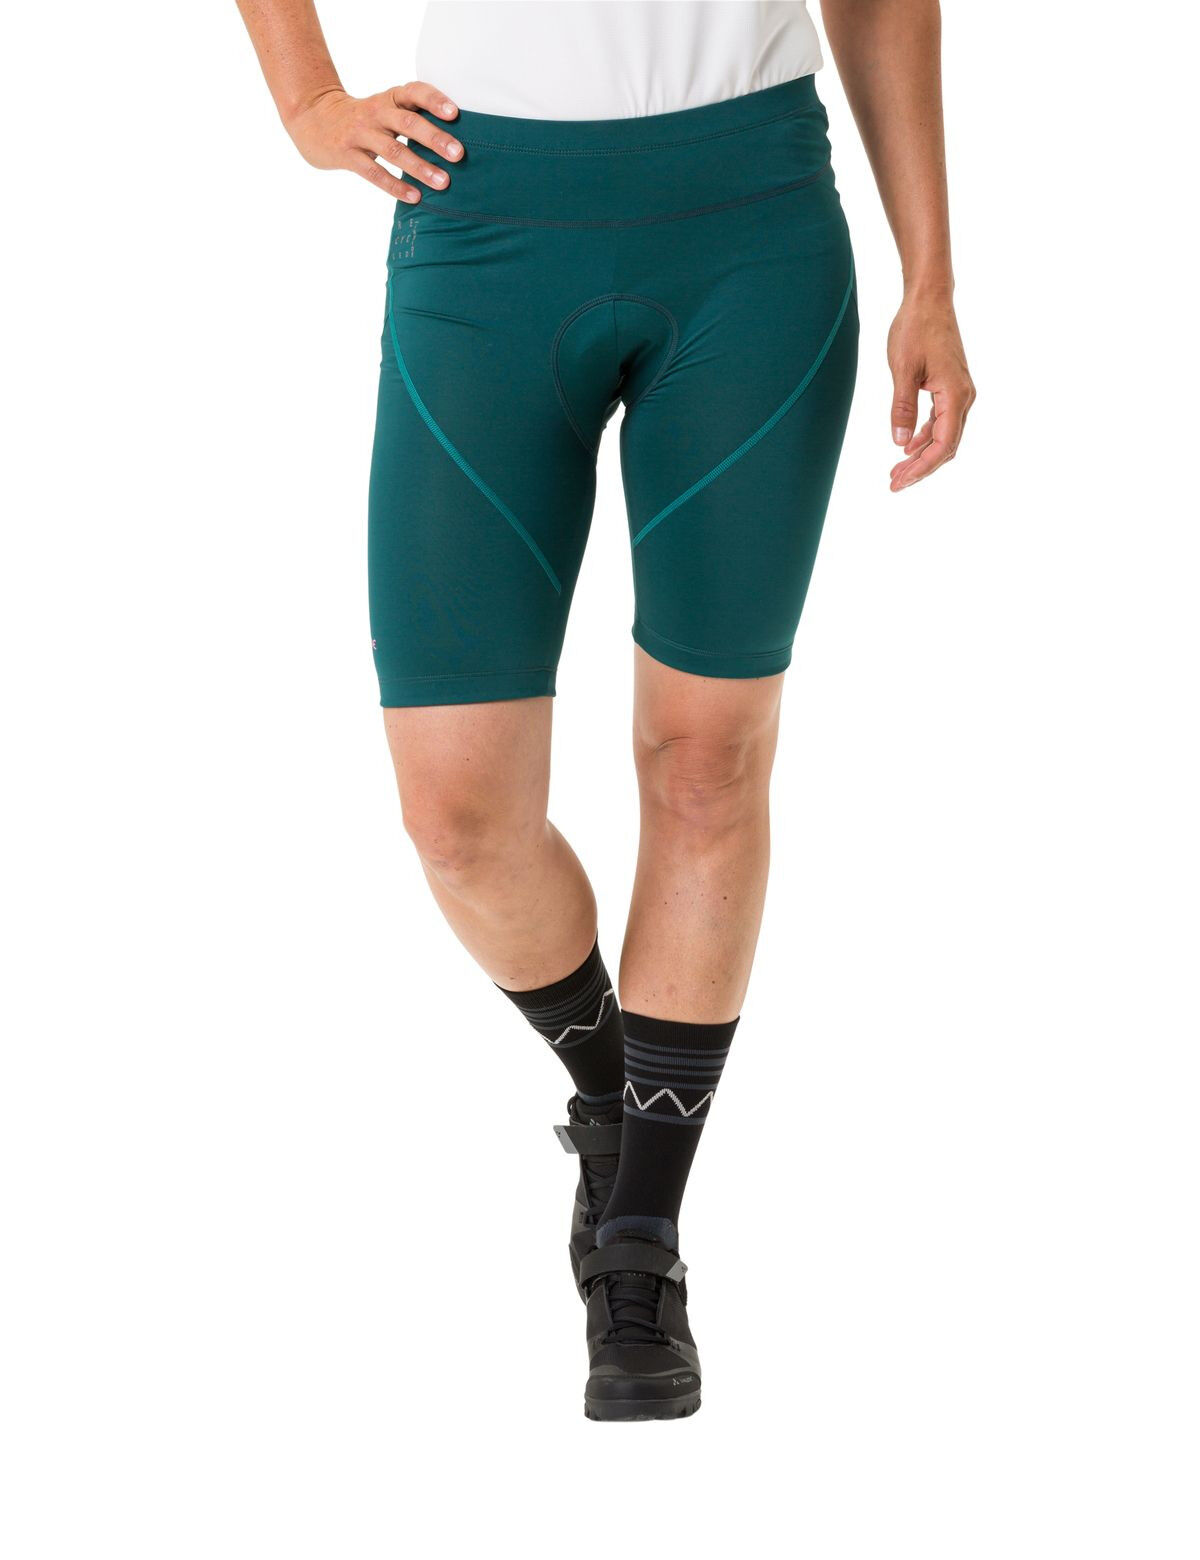 Vaude Matera Tights - Cycling trousers - Women's